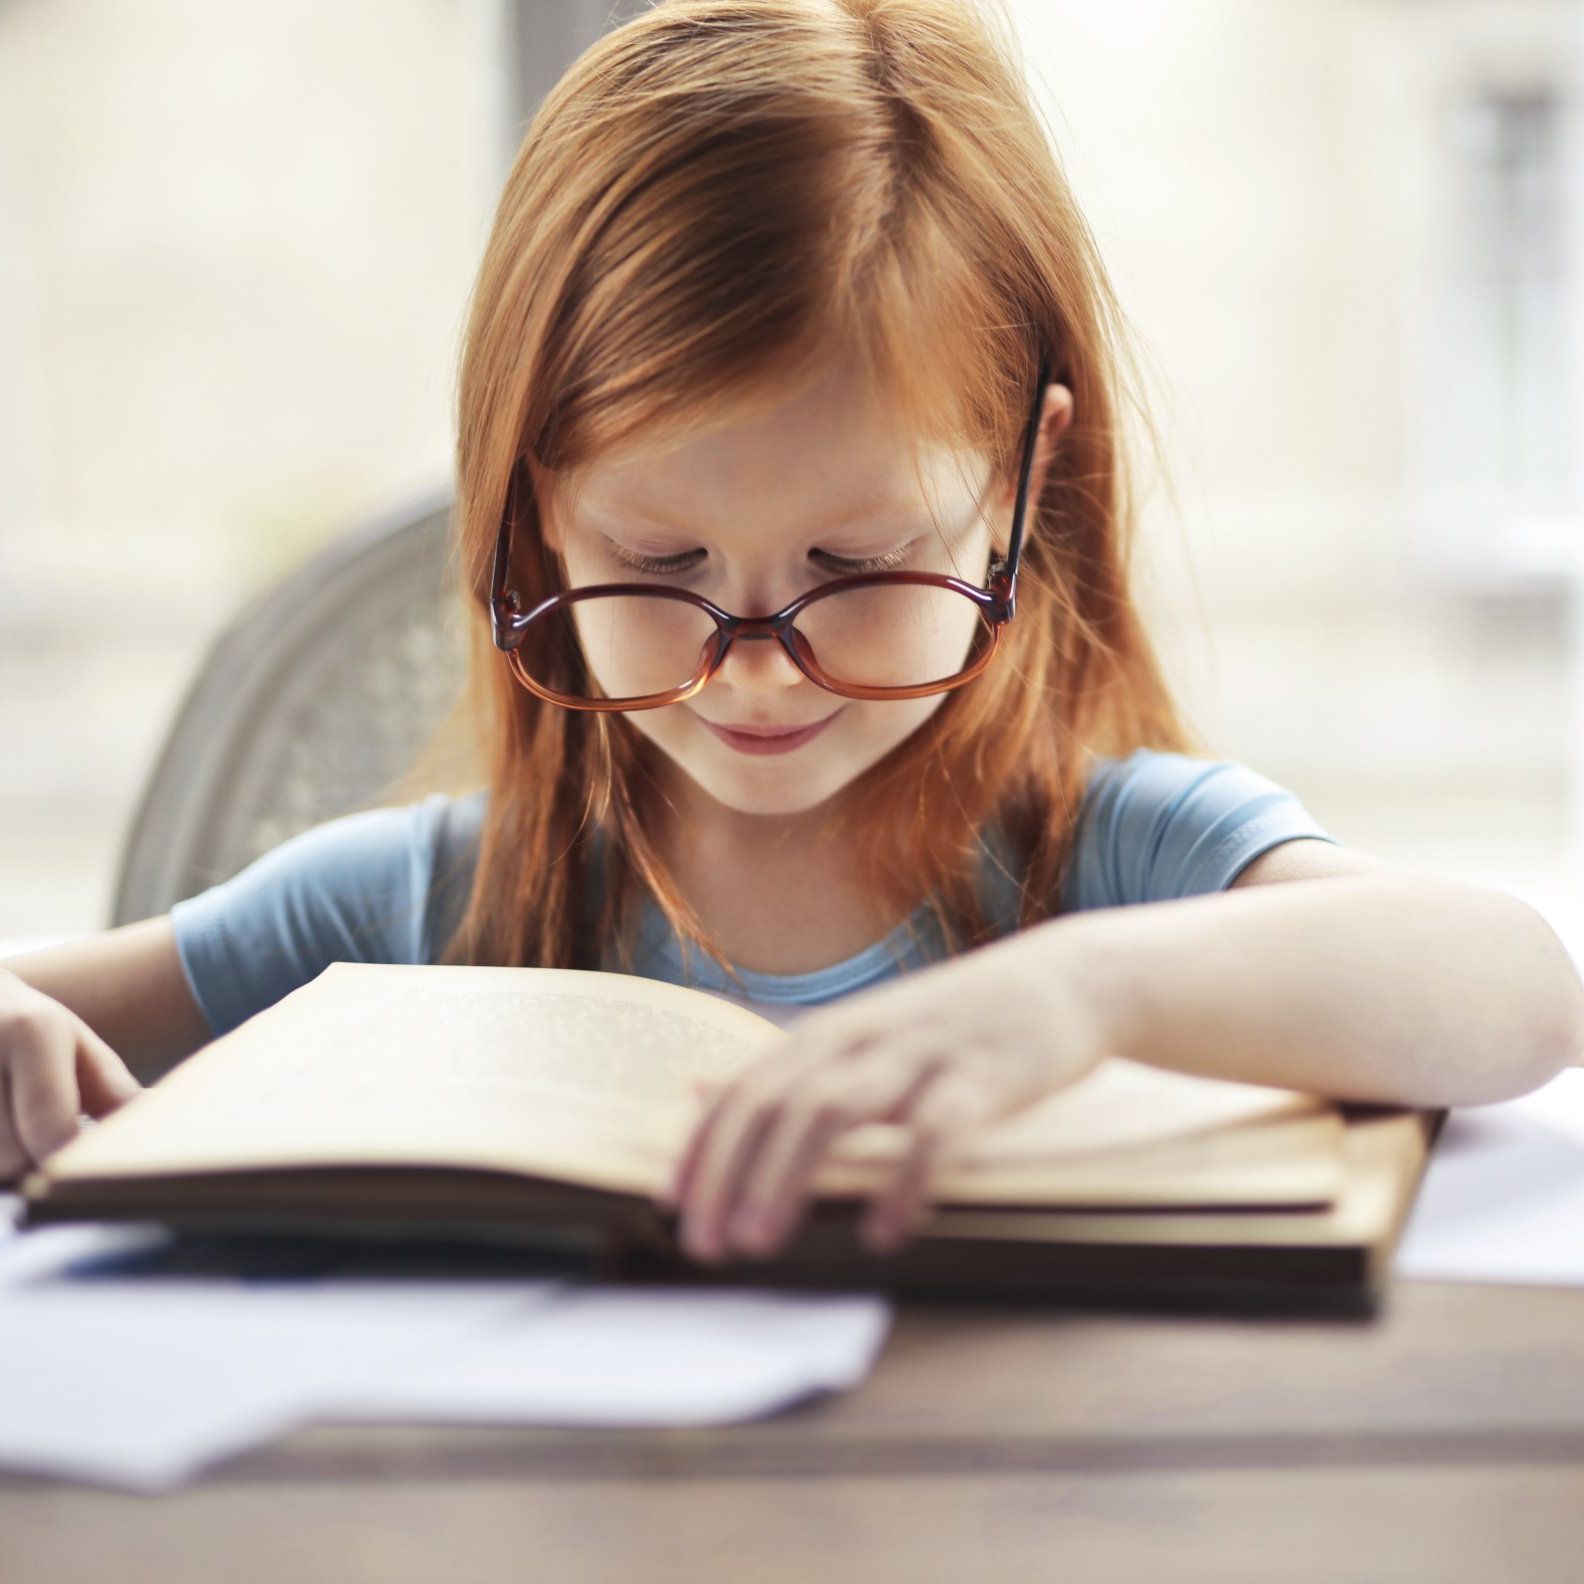 Image of redhead girl reading a book.